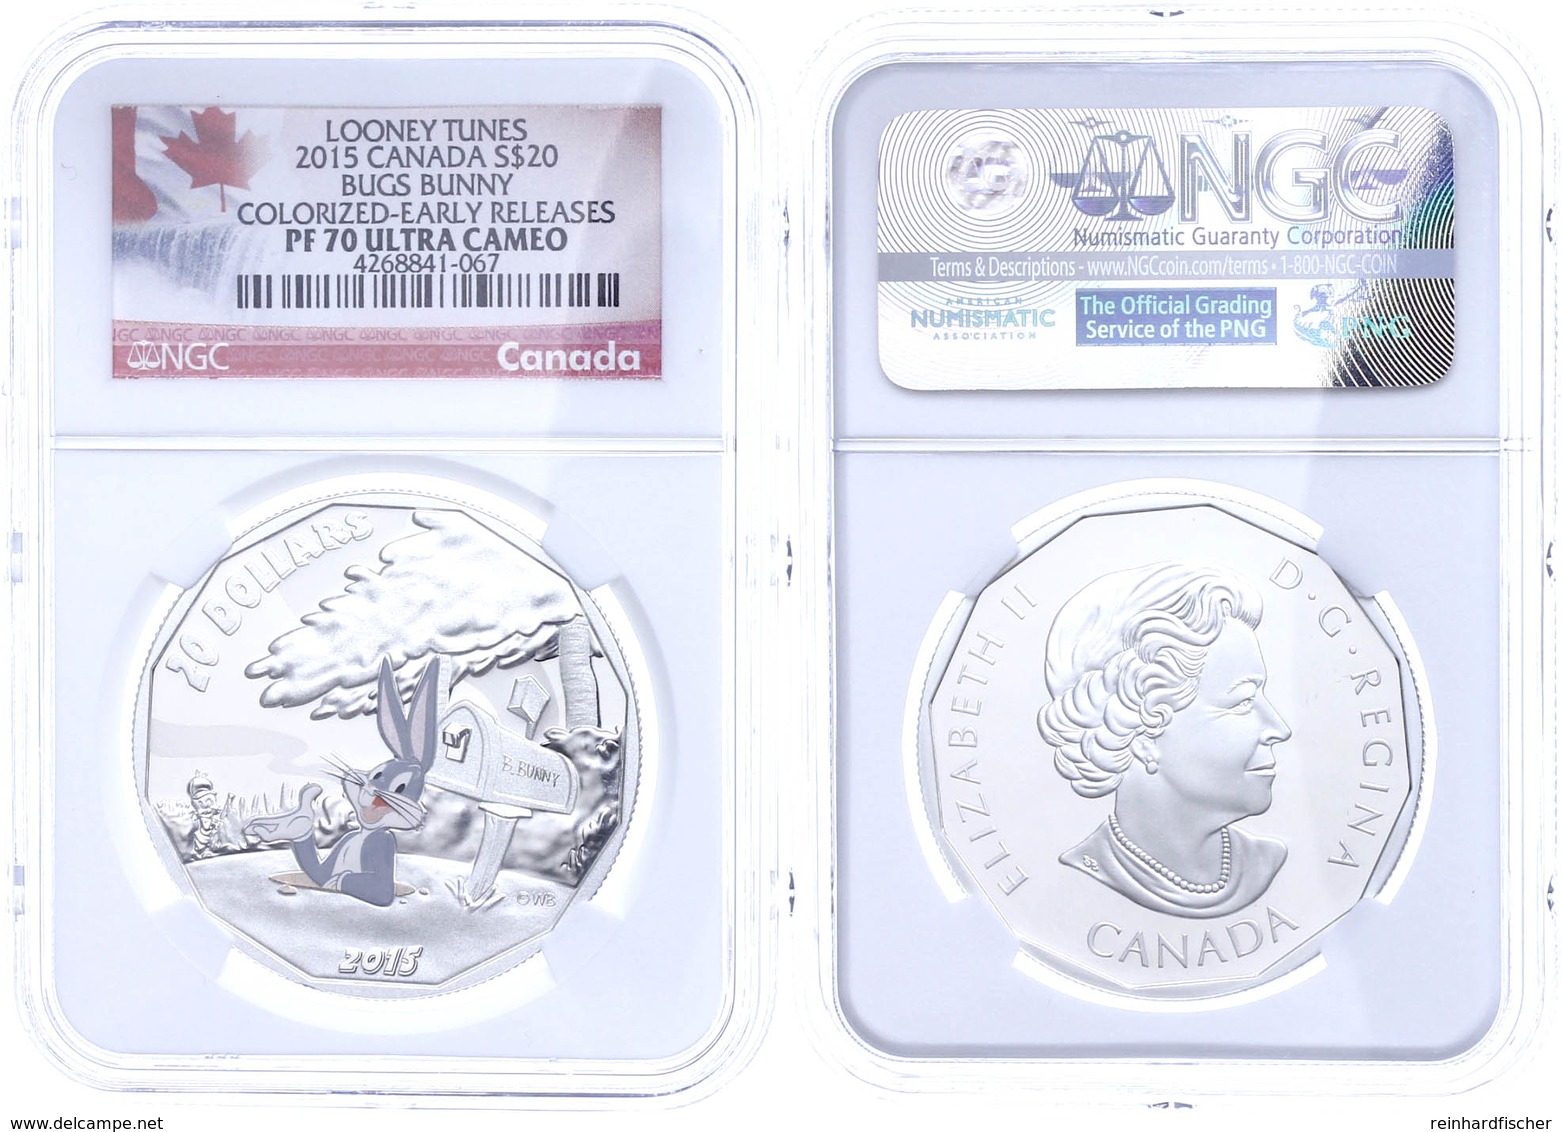 20 Dollars, 2015, Looney Tunes-Bugs Bunny, In Slab Der NGC Mit Der Bewertung PF 70 Ultra Cameo, Colorized Early Releases - Canada